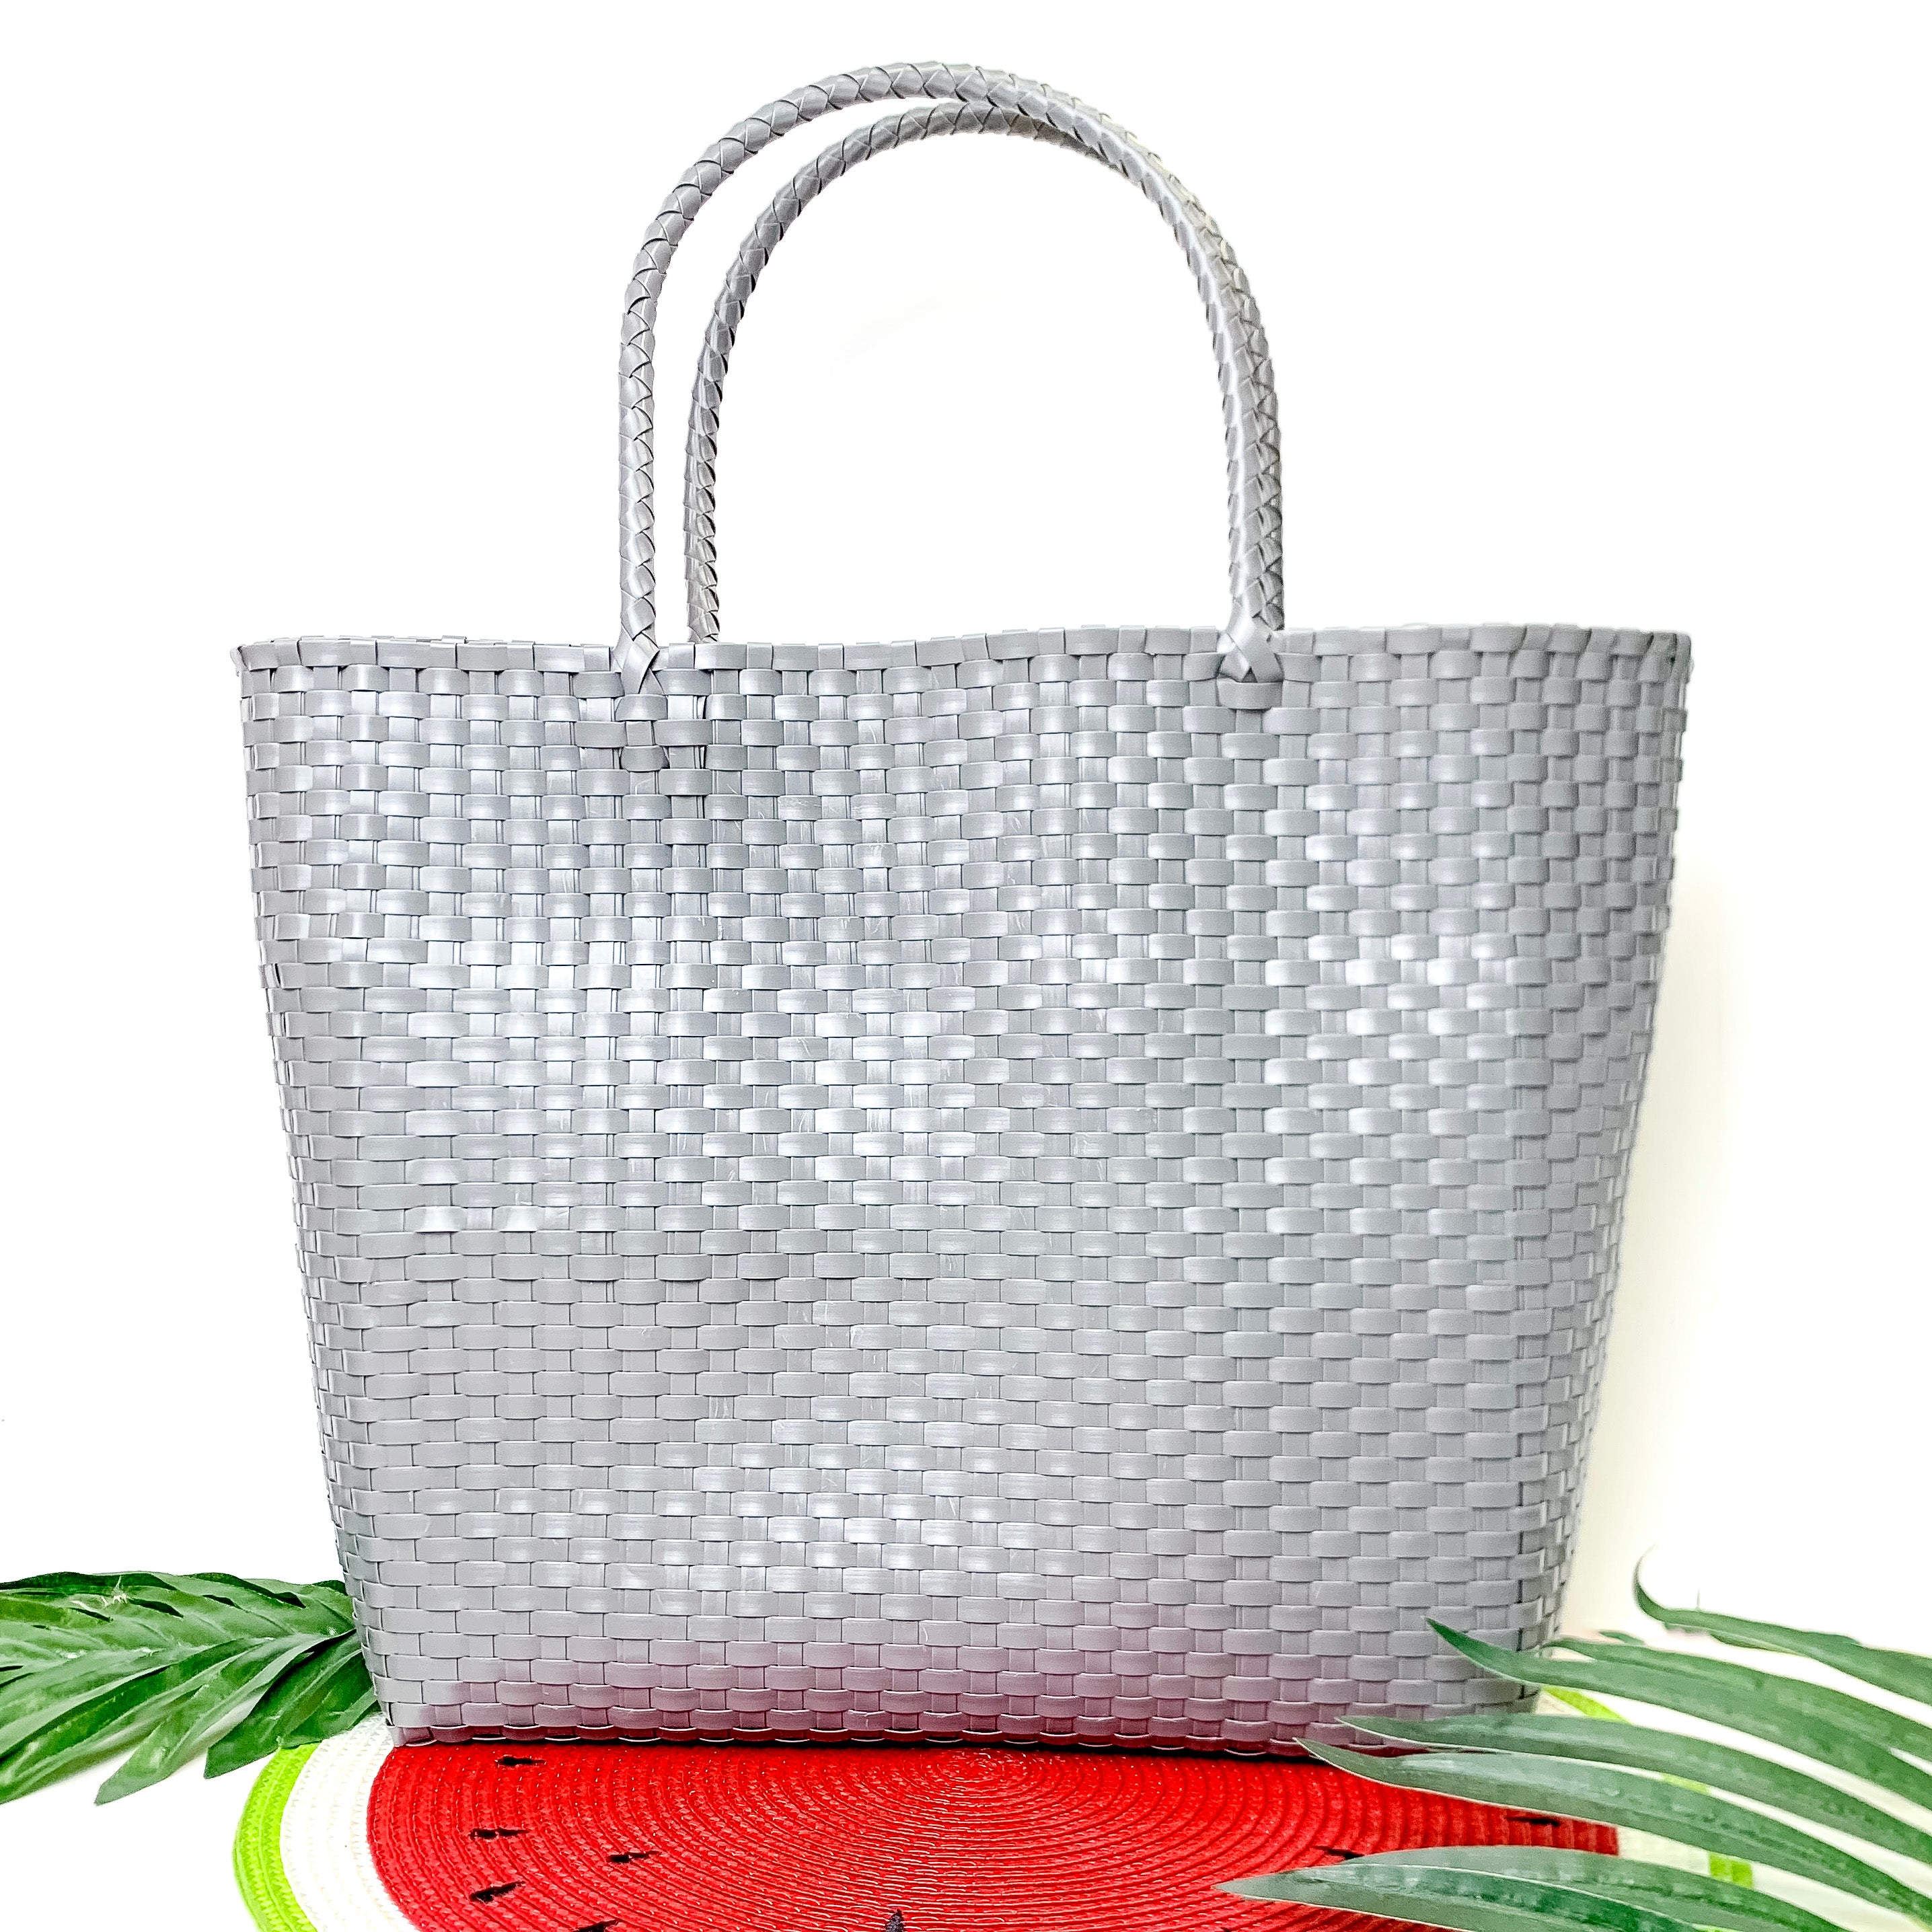 Coastal Couture Carryall Tote Bag in Grey